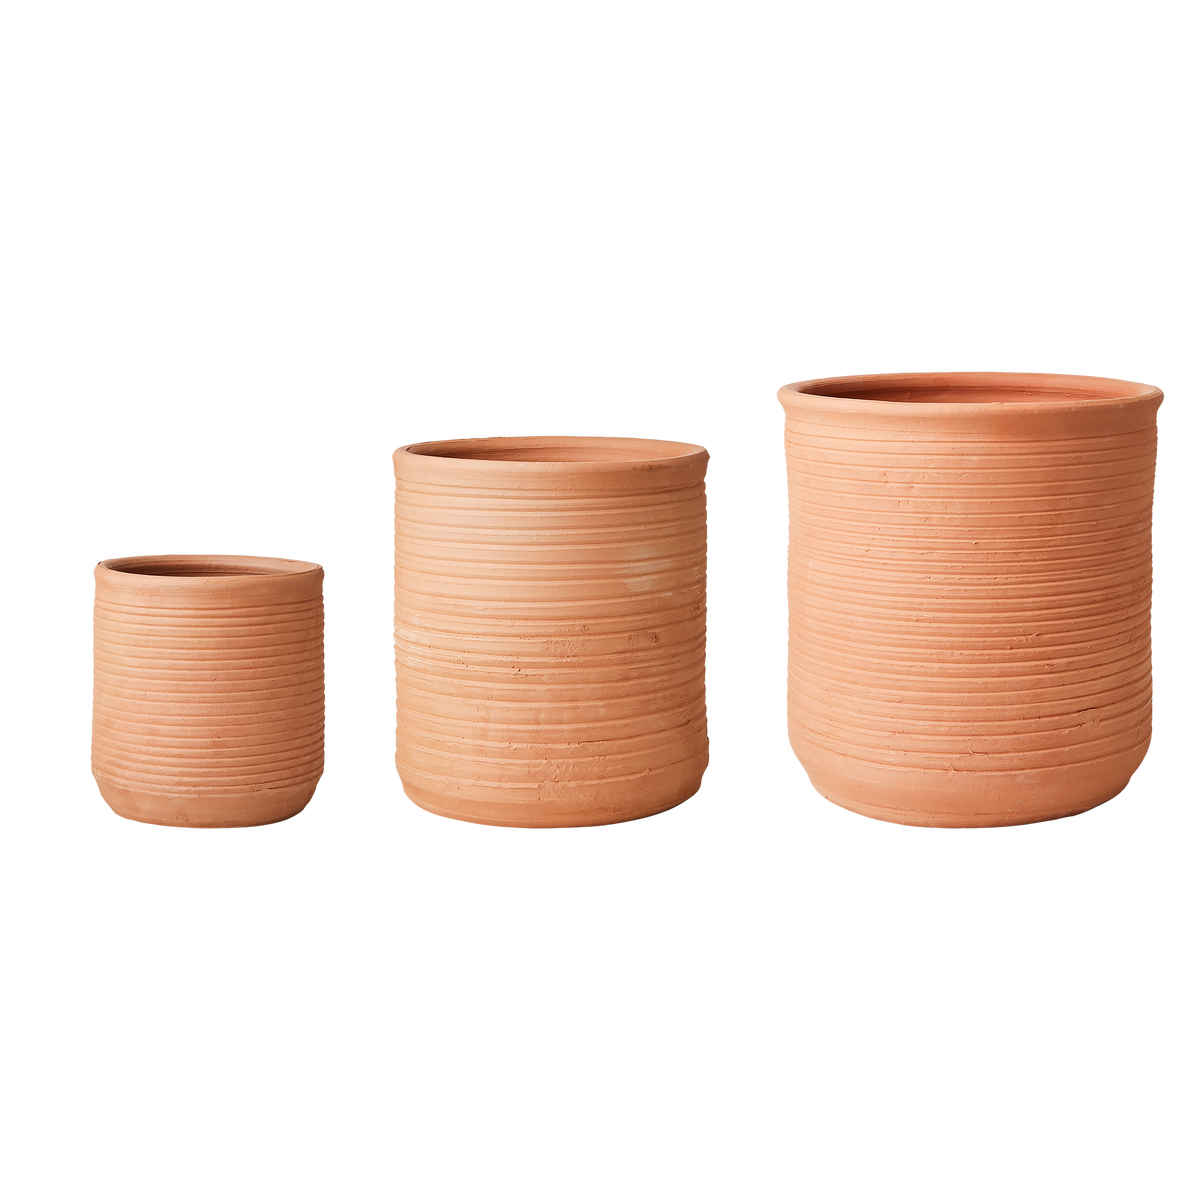 Hand-carved ridging and simple forms come together in the Ridge Terracotta Pot.